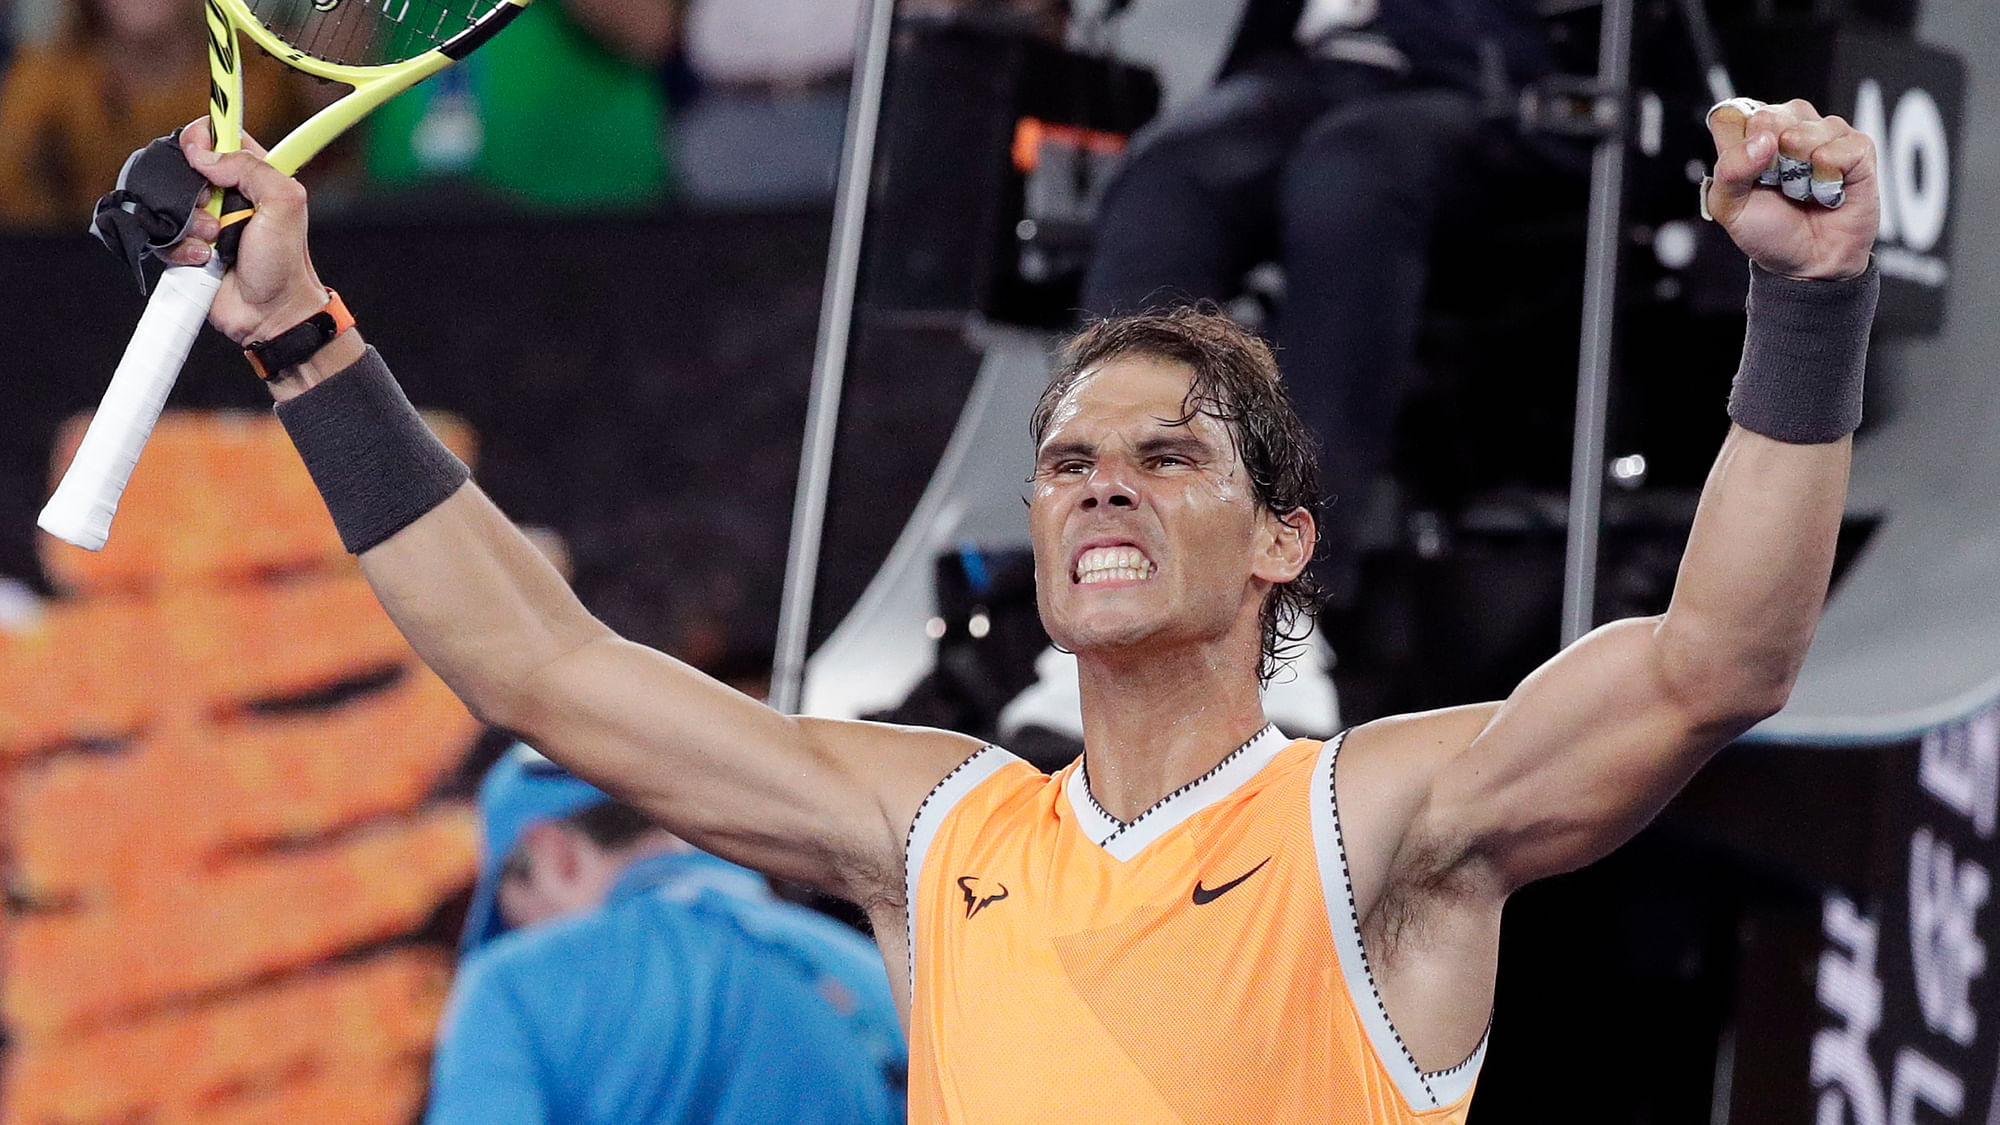 Spain’s Rafael Nadal celebrates after defeating United States’ Frances Tiafoe in their quarter-final match at the Australian Open in Melbourne..